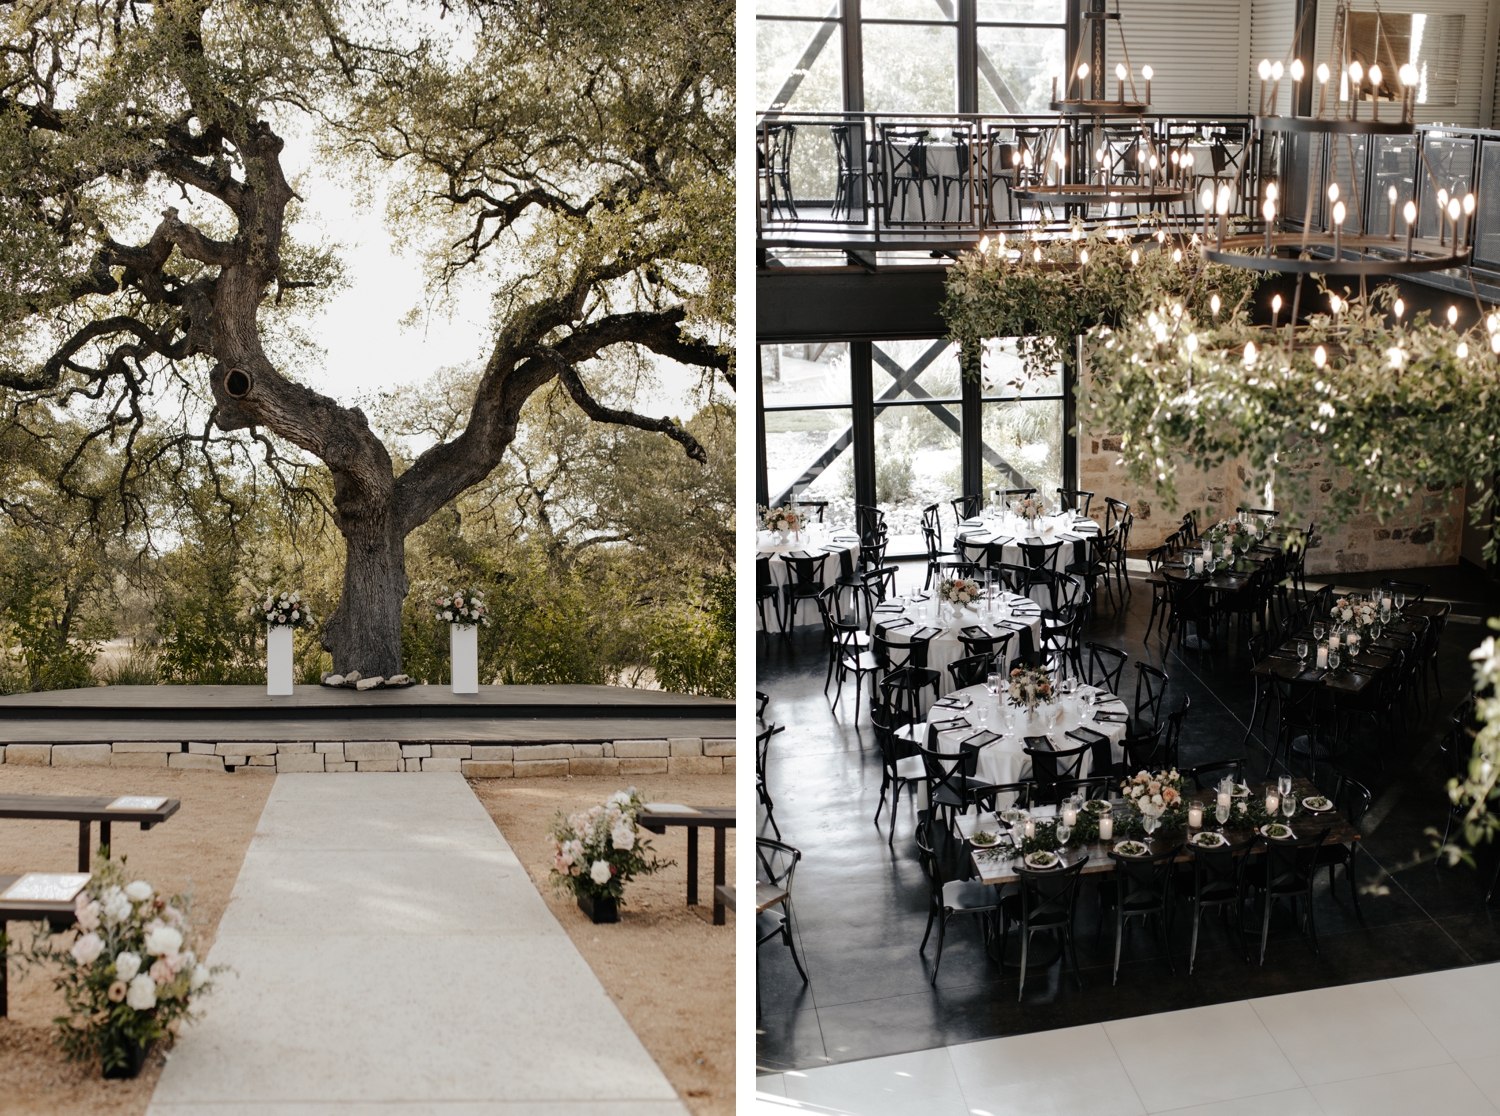 Park 31 wedding venue in the Texas Hill Country decorated by Reiley and Rose with florals and greenery. | Texas Hill Country Fall Wedding | Central Texas Wedding Floral Designer